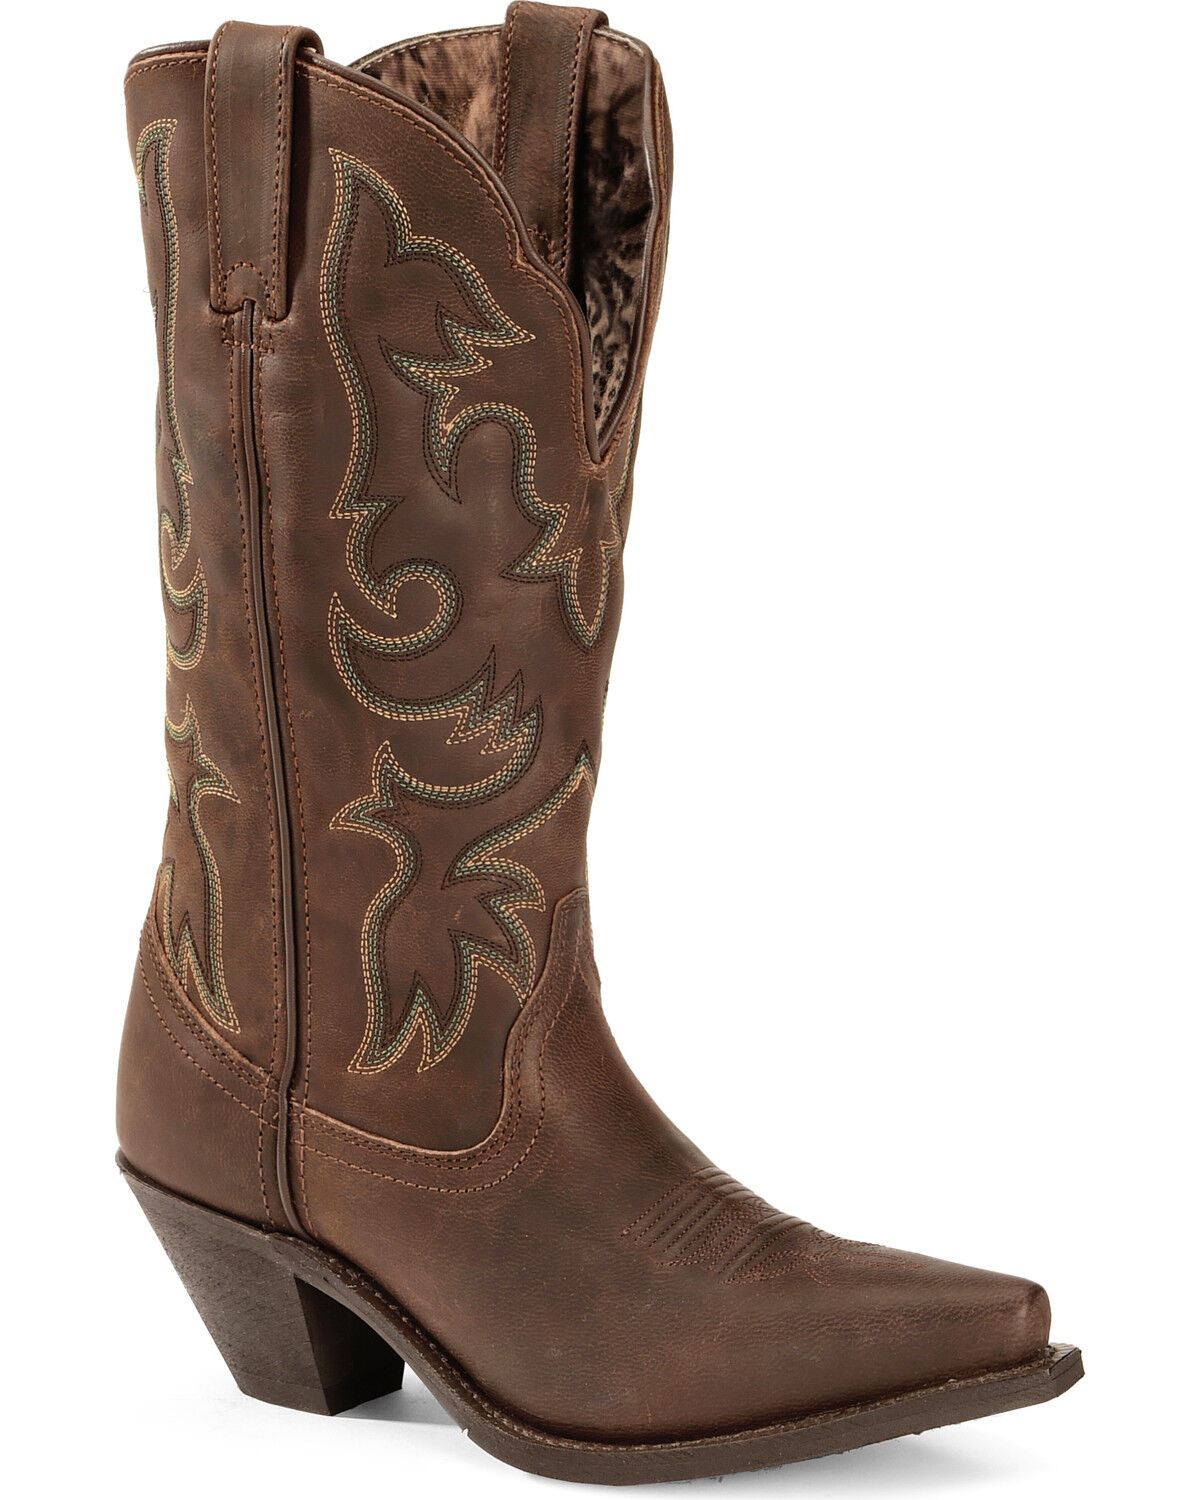 Laredo Access Cowgirl Boots - Extended 